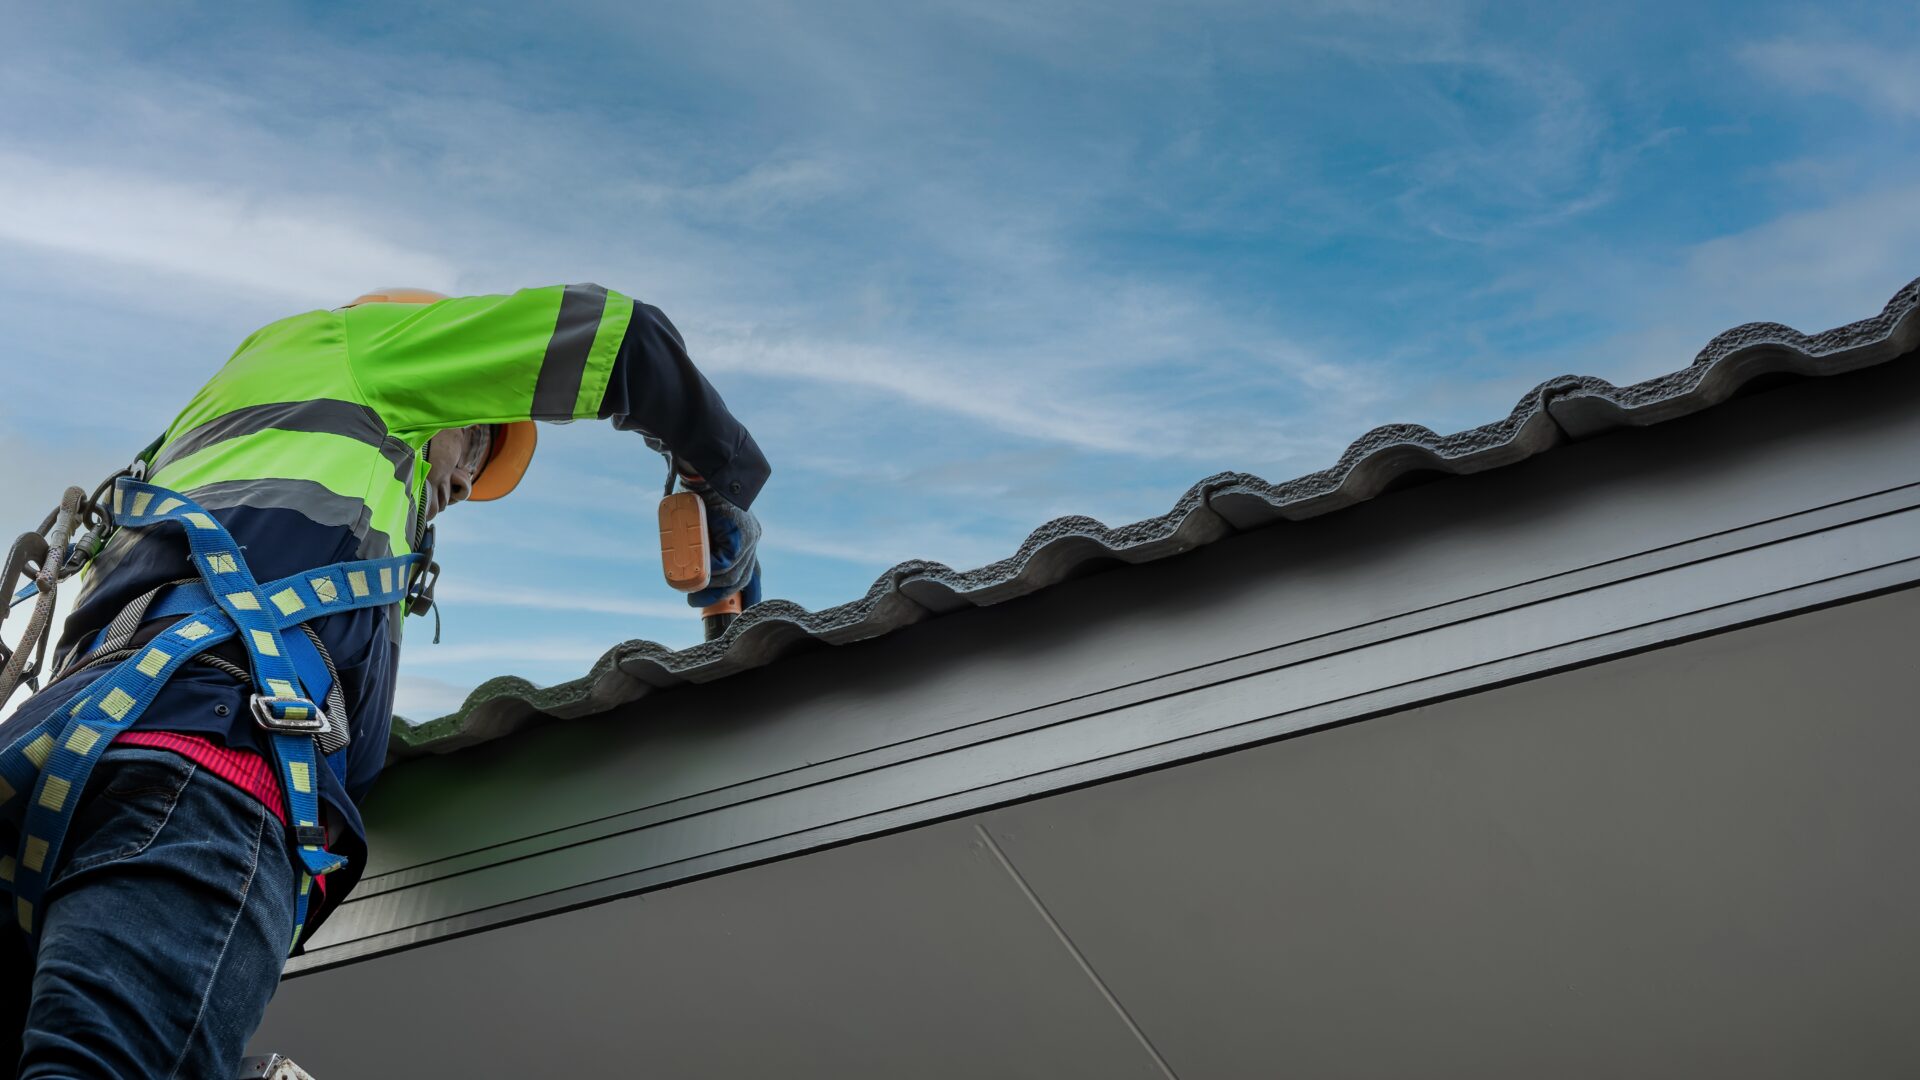 A roofer on a ladder makes repairs to a tile roof